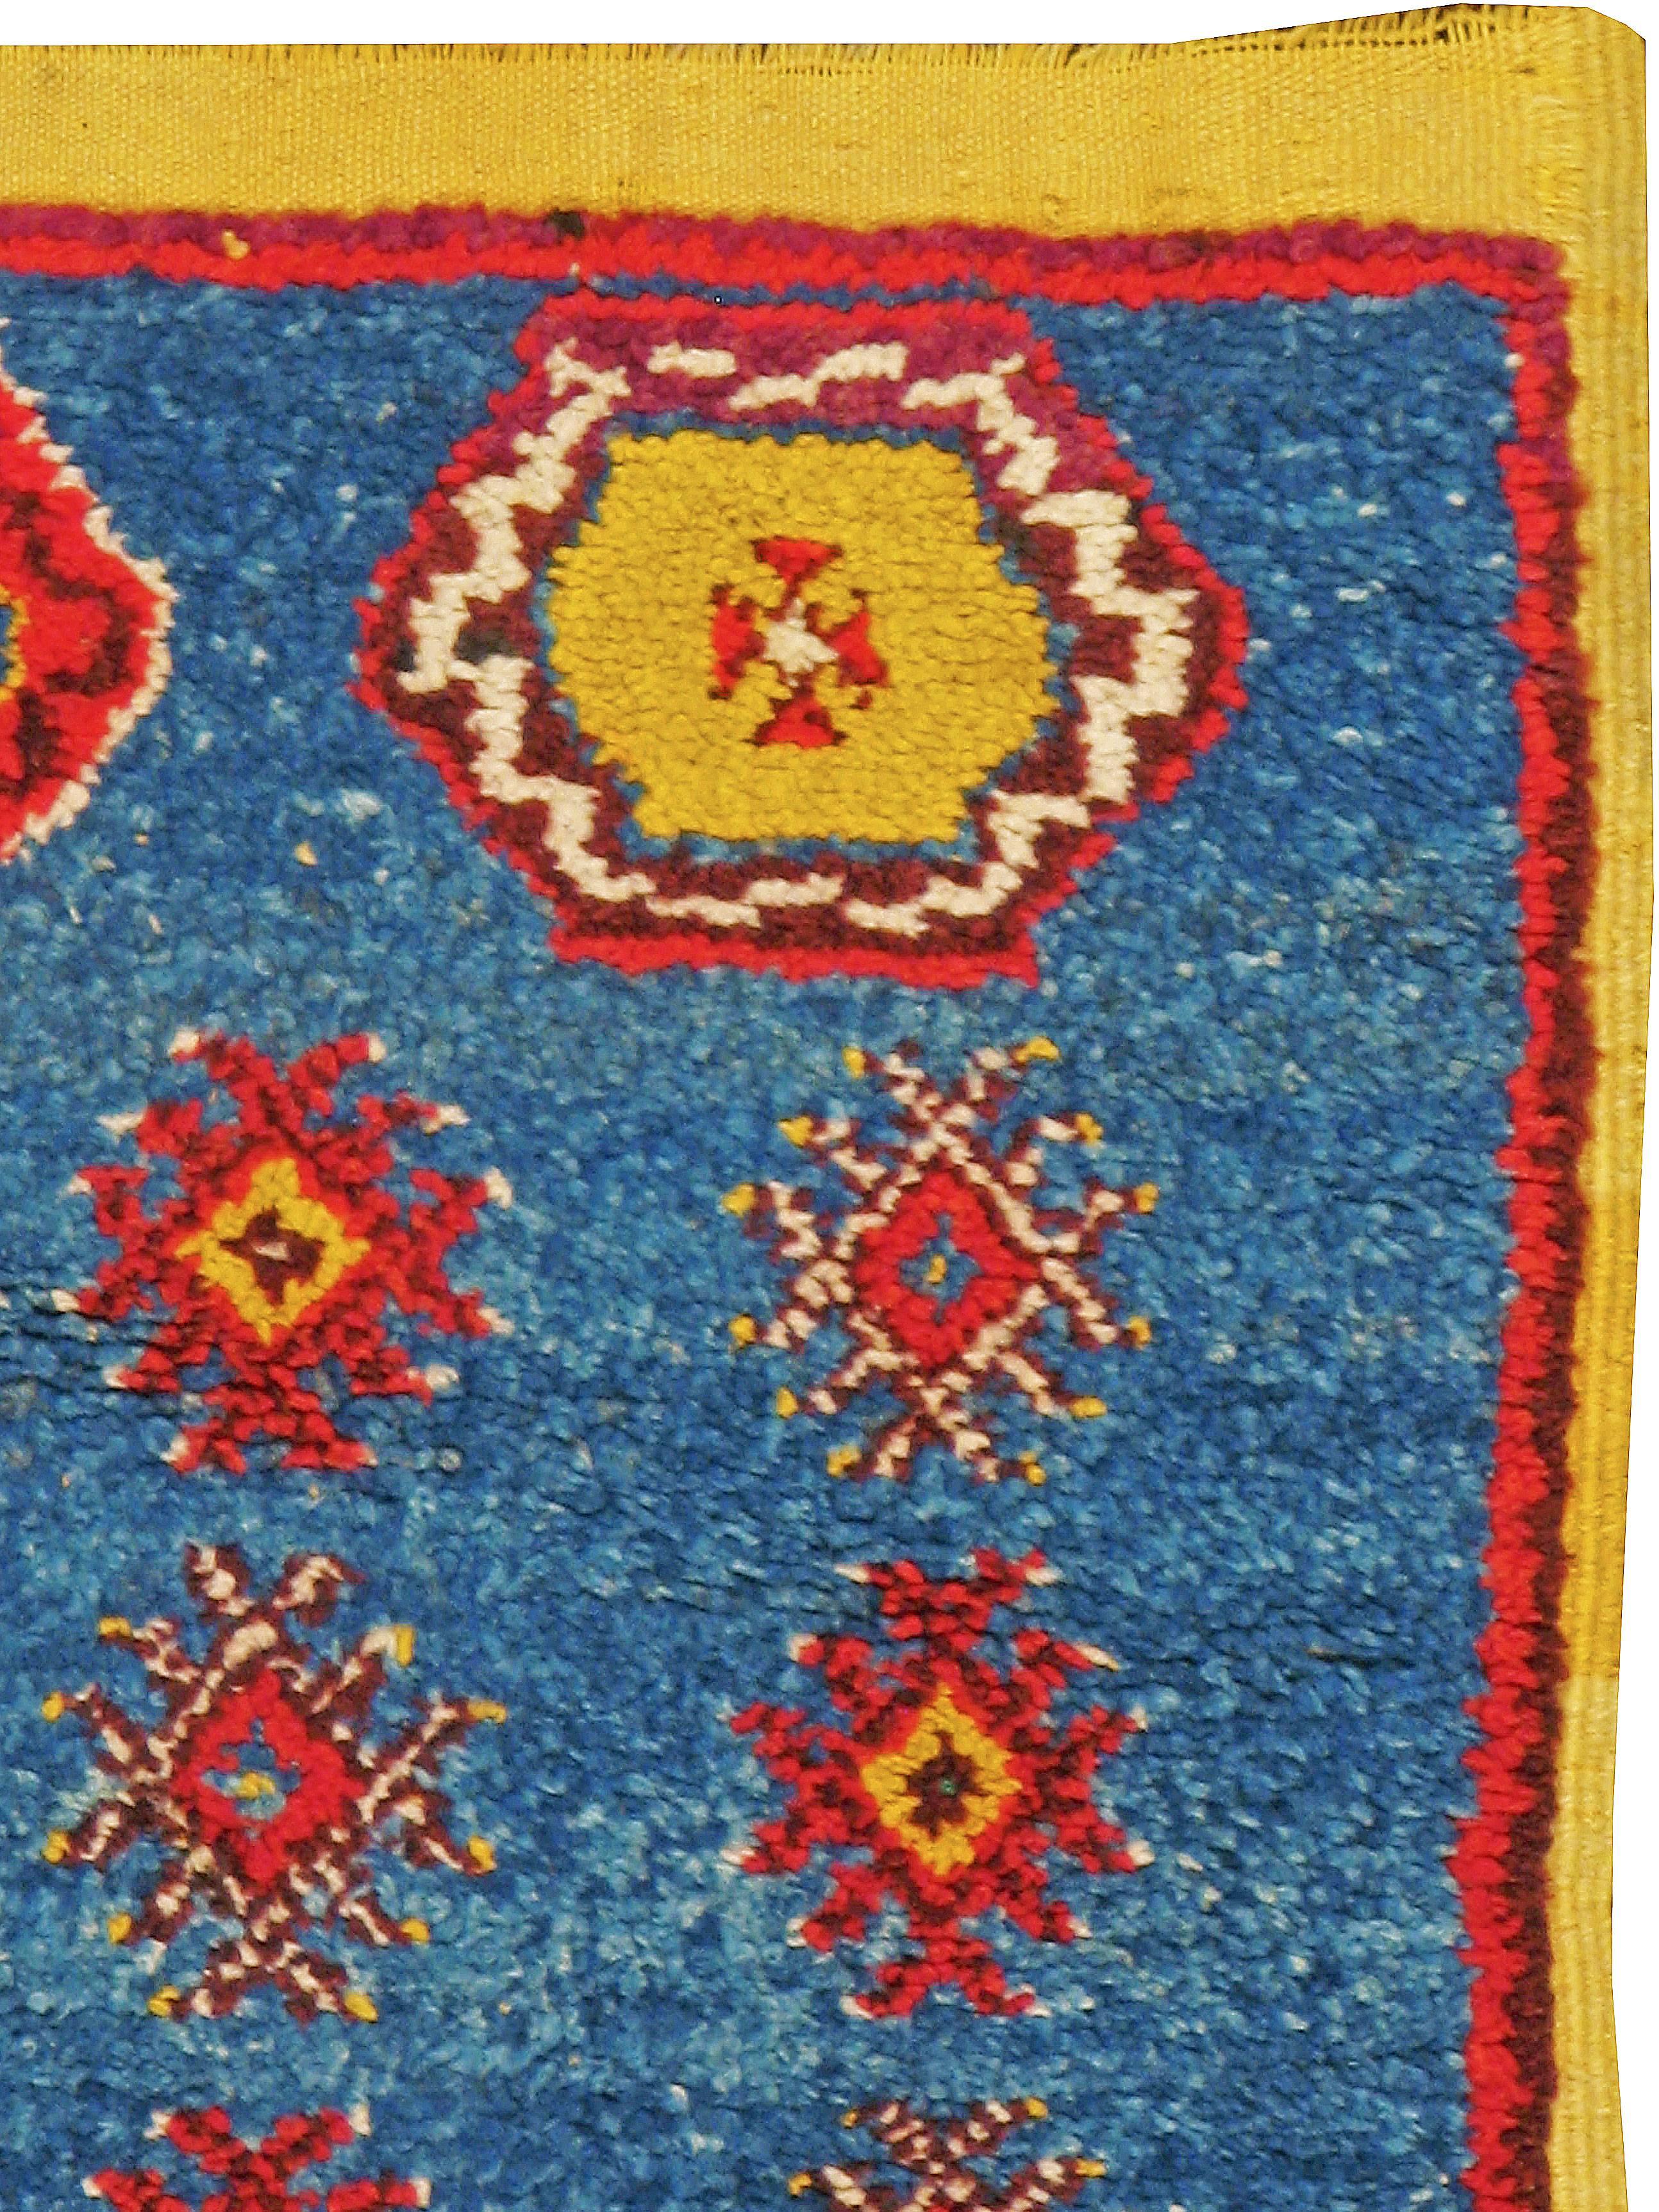 A vintage Moroccan Berber carpet from the second half of the 20th century.